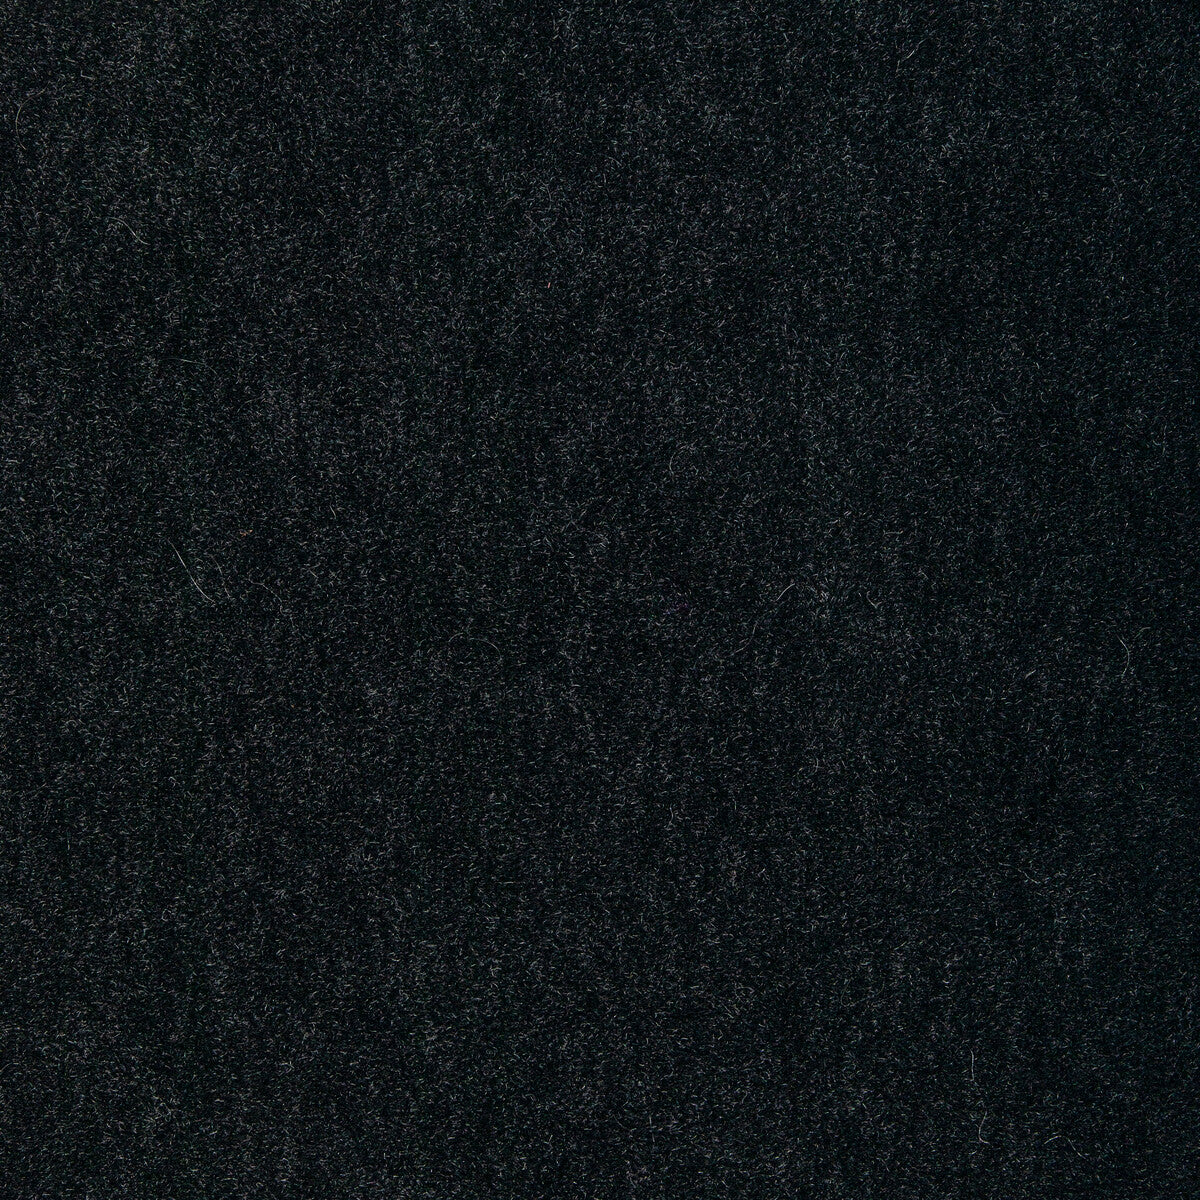 Chic Alpaca fabric in charcoal color - pattern 33837.8.0 - by Kravet Couture